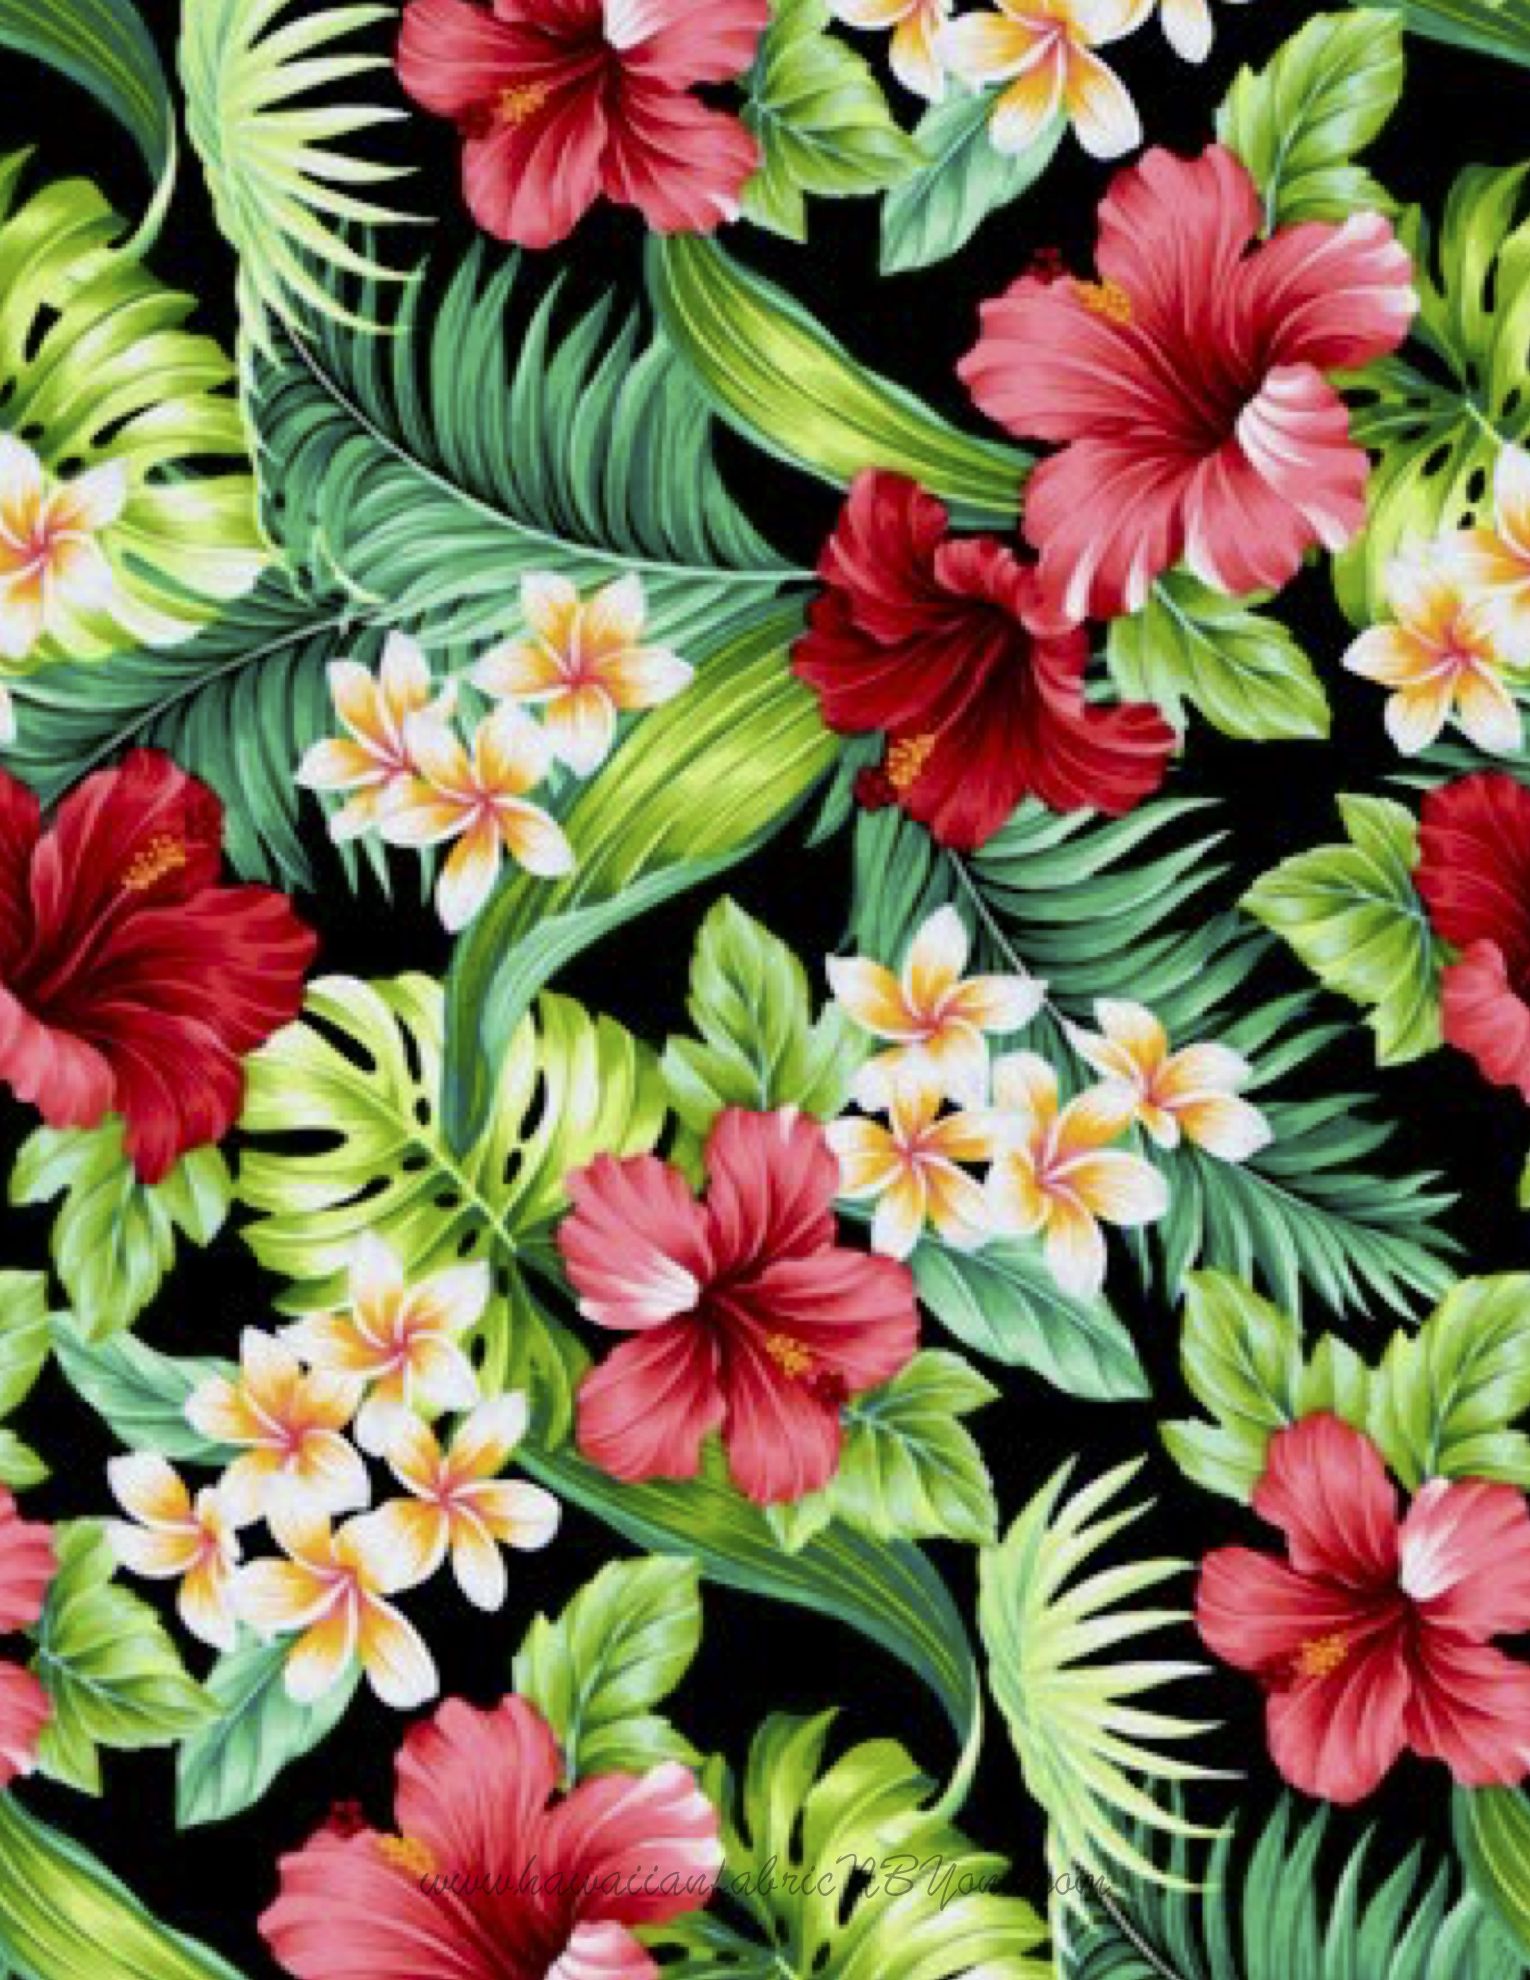 Bright tropical floral fabric #Hawaiian #floral #fabric #etsyshops #tropical #tissu #stoff. Tropical art, Tropical wallpaper, Wave art painting